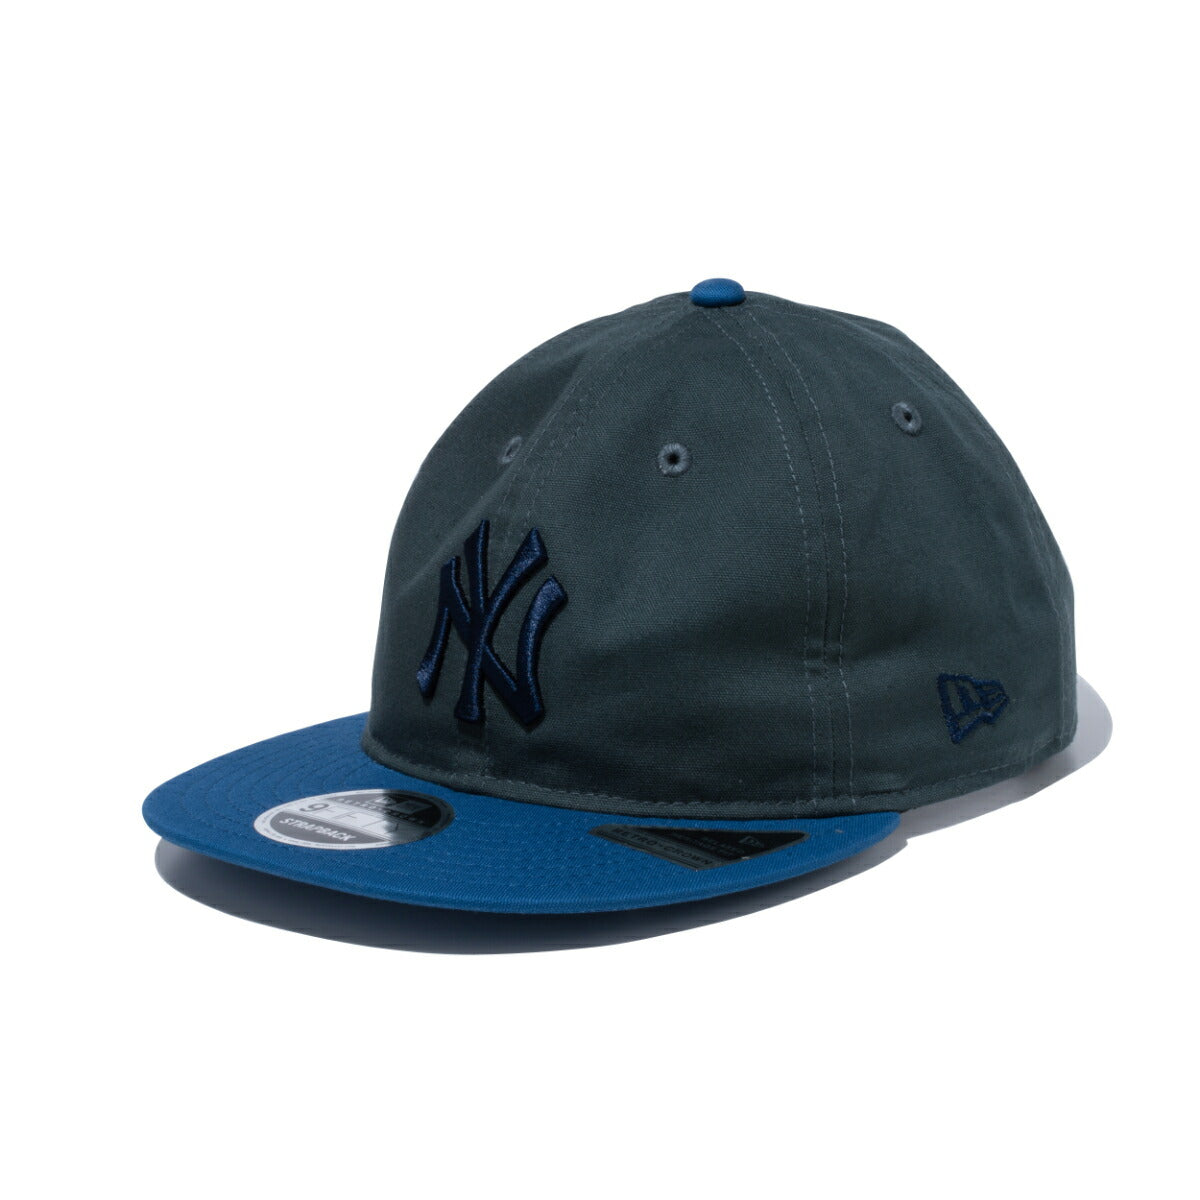 NEW YORK YANKEES TWO-TONE RETRO CROWN 9FIFTY